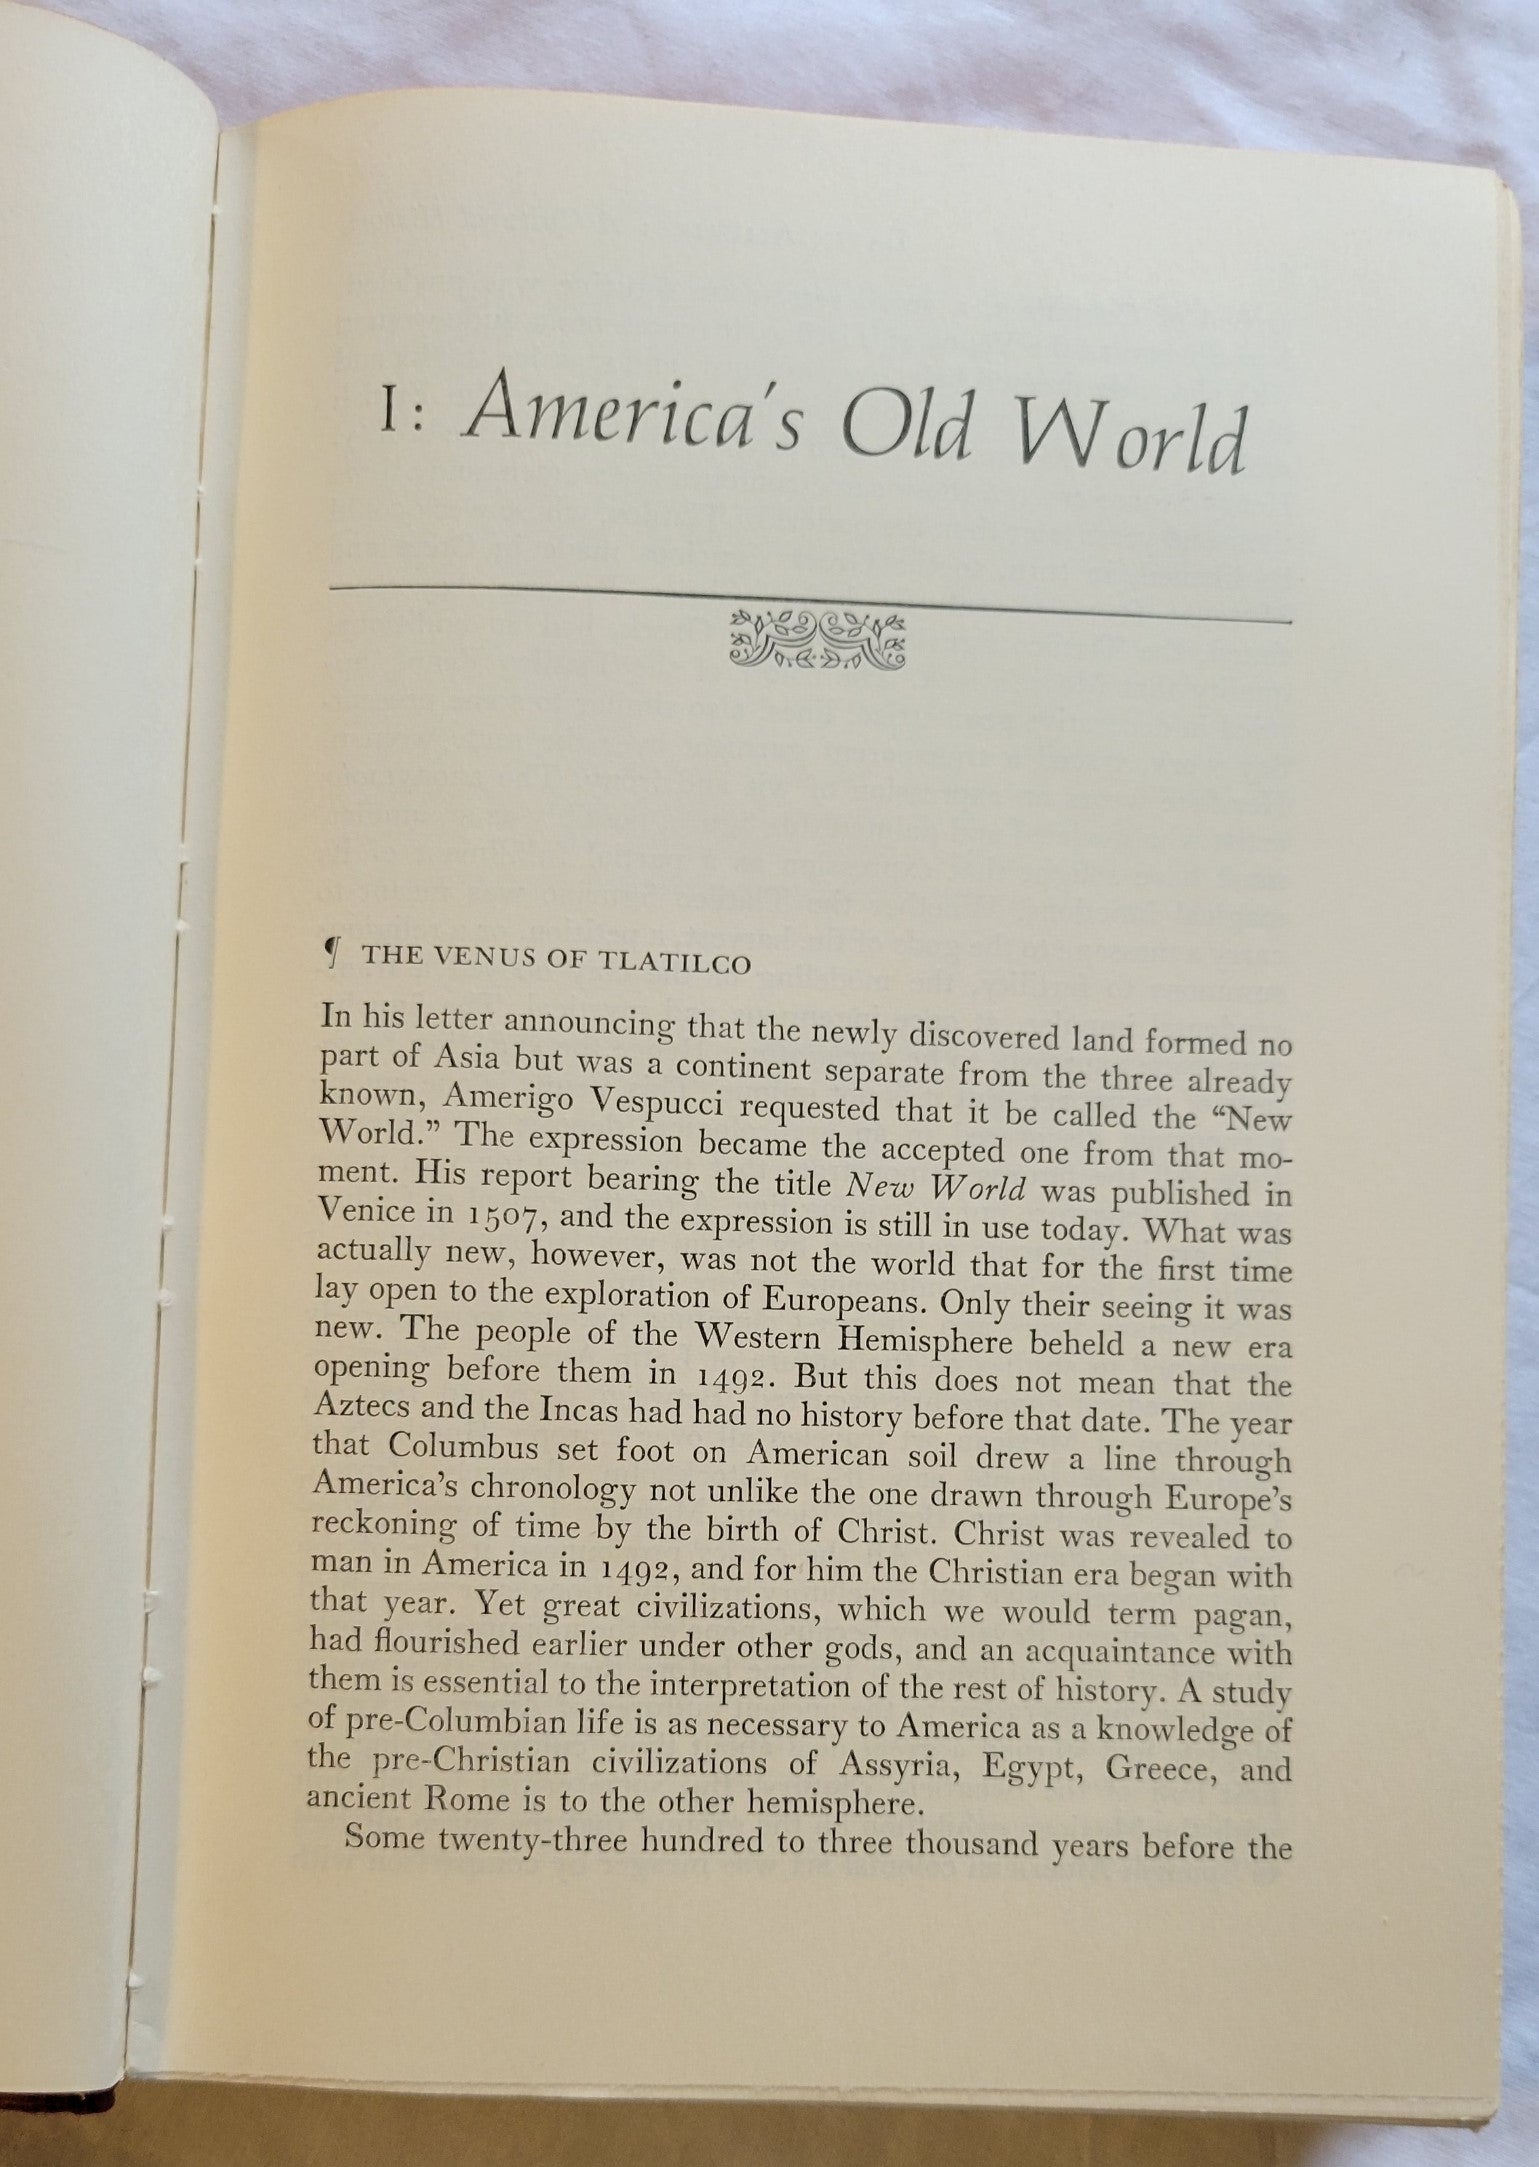 Vintage book for sale, “Latin America: A Cultural History, First American Edition” by German Arciniegas, published by Alfred A. Knopf, Inc., copyright 1966.  View of chapter one.